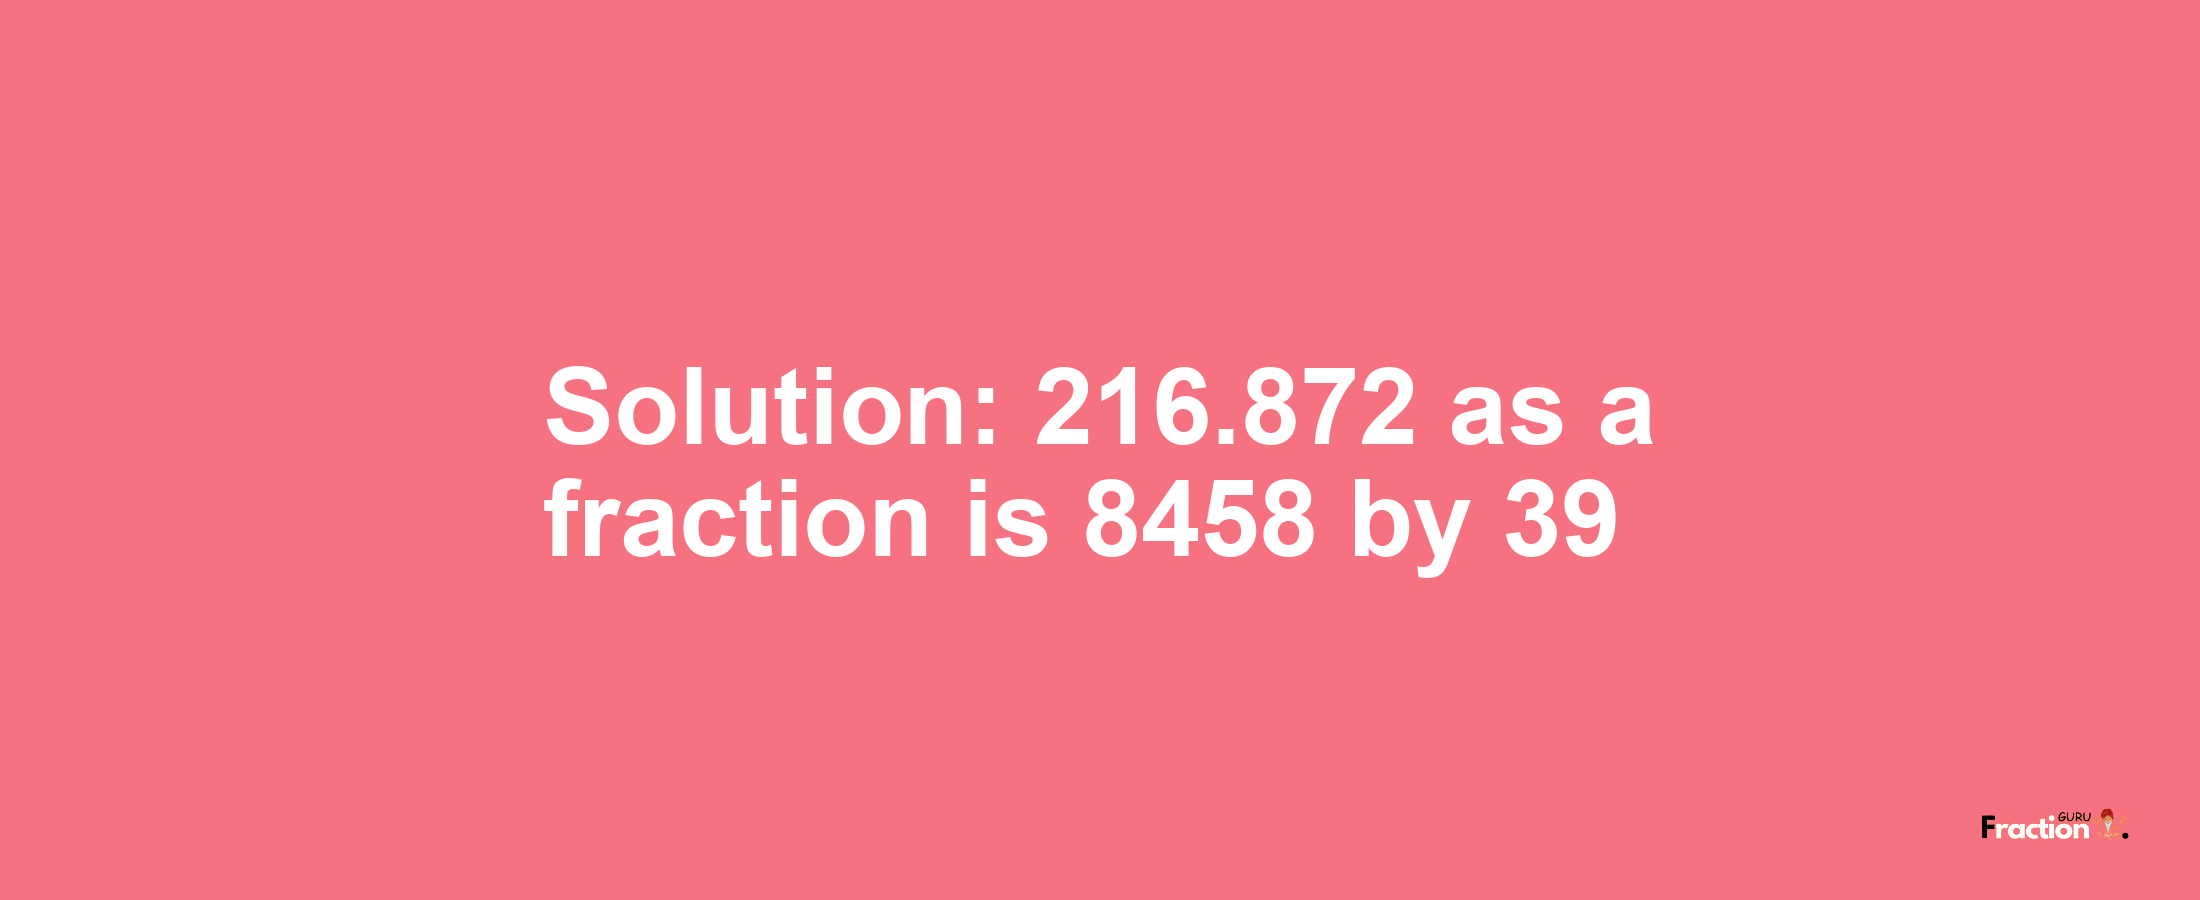 Solution:216.872 as a fraction is 8458/39